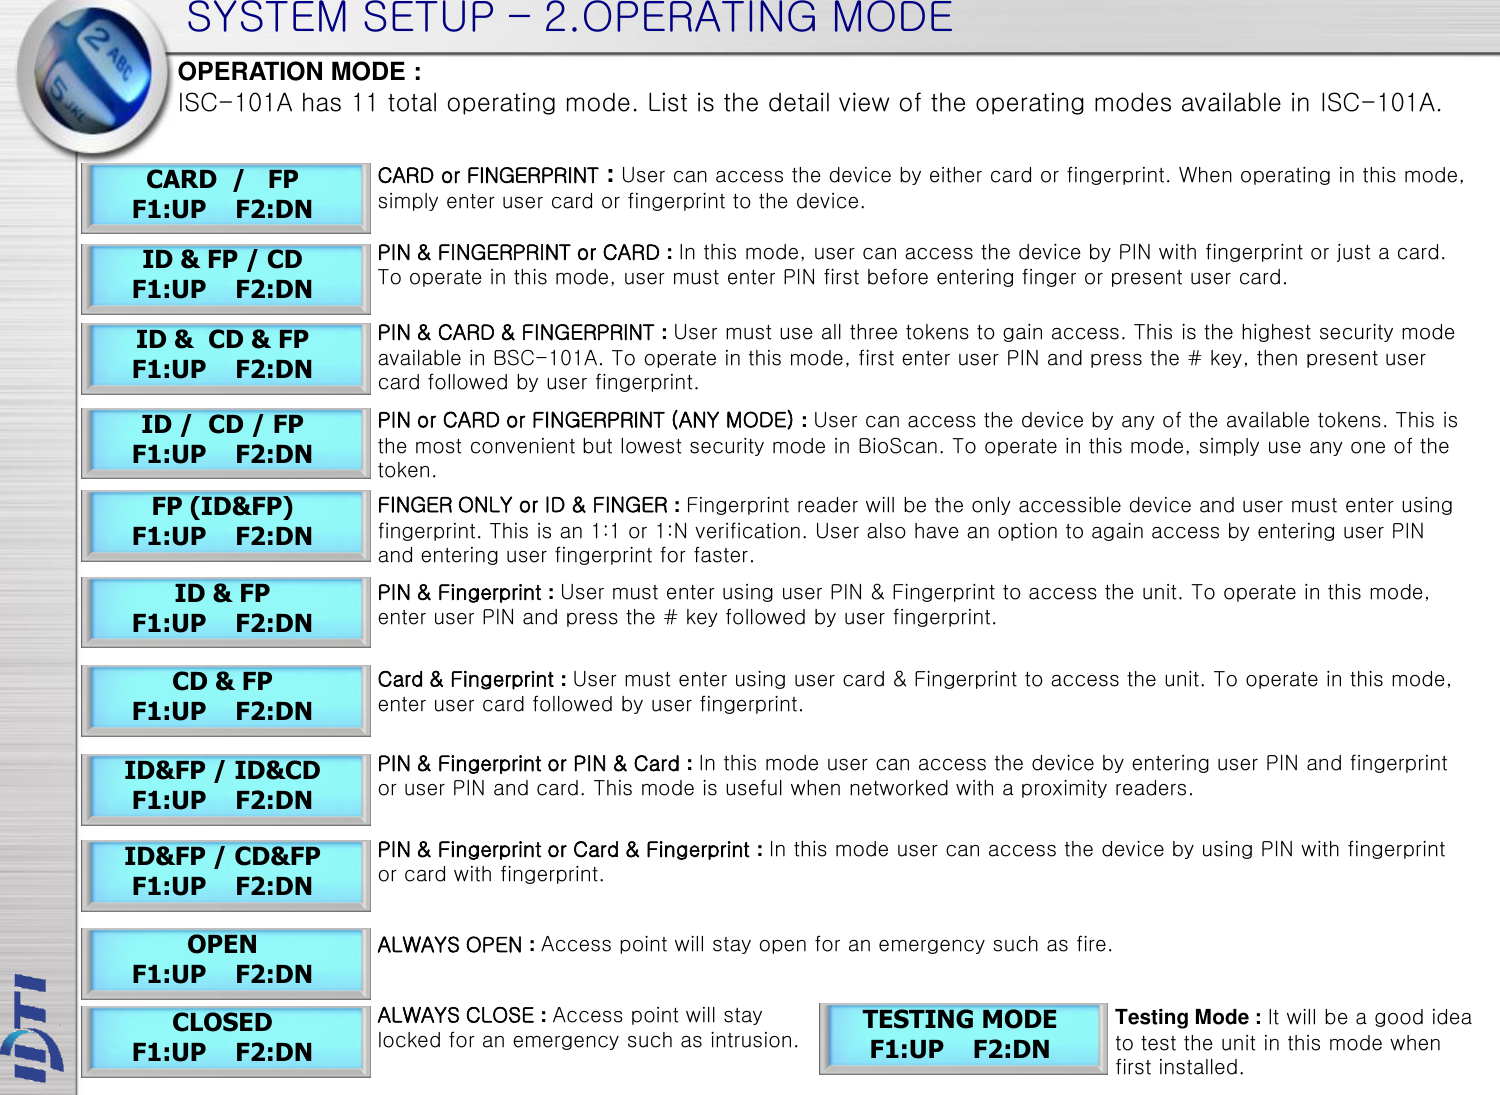 SYSTEM SETUP – 2.OPERATING MODE OPEN F1:UP    F2:DN ID &amp; FP F1:UP    F2:DN CARD  /   FP F1:UP    F2:DN ID &amp; FP / CD  F1:UP    F2:DN FP (ID&amp;FP) F1:UP    F2:DN ID &amp;  CD &amp; FP F1:UP    F2:DN CLOSED F1:UP    F2:DN TESTING MODE F1:UP    F2:DN CARD or FINGERPRINT : User can access the device by either card or fingerprint. When operating in this mode, simply enter user card or fingerprint to the device. PIN &amp; FINGERPRINT or CARD : In this mode, user can access the device by PIN with fingerprint or just a card. To operate in this mode, user must enter PIN first before entering finger or present user card. PIN &amp; CARD &amp; FINGERPRINT : User must use all three tokens to gain access. This is the highest security mode available in BSC-101A. To operate in this mode, first enter user PIN and press the # key, then present user card followed by user fingerprint.  OPERATION MODE : ISC-101A has 11 total operating mode. List is the detail view of the operating modes available in ISC-101A. PIN or CARD or FINGERPRINT (ANY MODE) : User can access the device by any of the available tokens. This is the most convenient but lowest security mode in BioScan. To operate in this mode, simply use any one of the token. FINGER ONLY or ID &amp; FINGER : Fingerprint reader will be the only accessible device and user must enter using fingerprint. This is an 1:1 or 1:N verification. User also have an option to again access by entering user PIN and entering user fingerprint for faster. PIN &amp; Fingerprint : User must enter using user PIN &amp; Fingerprint to access the unit. To operate in this mode, enter user PIN and press the # key followed by user fingerprint. ALWAYS OPEN : Access point will stay open for an emergency such as fire. ALWAYS CLOSE : Access point will stay locked for an emergency such as intrusion. Testing Mode : It will be a good idea to test the unit in this mode when first installed. CD &amp; FP  F1:UP    F2:DN Card &amp; Fingerprint : User must enter using user card &amp; Fingerprint to access the unit. To operate in this mode, enter user card followed by user fingerprint.  ID&amp;FP / ID&amp;CD F1:UP    F2:DN PIN &amp; Fingerprint or PIN &amp; Card : In this mode user can access the device by entering user PIN and fingerprint or user PIN and card. This mode is useful when networked with a proximity readers.  ID&amp;FP / CD&amp;FP F1:UP    F2:DN PIN &amp; Fingerprint or Card &amp; Fingerprint : In this mode user can access the device by using PIN with fingerprint or card with fingerprint.  ID /  CD / FP F1:UP    F2:DN 